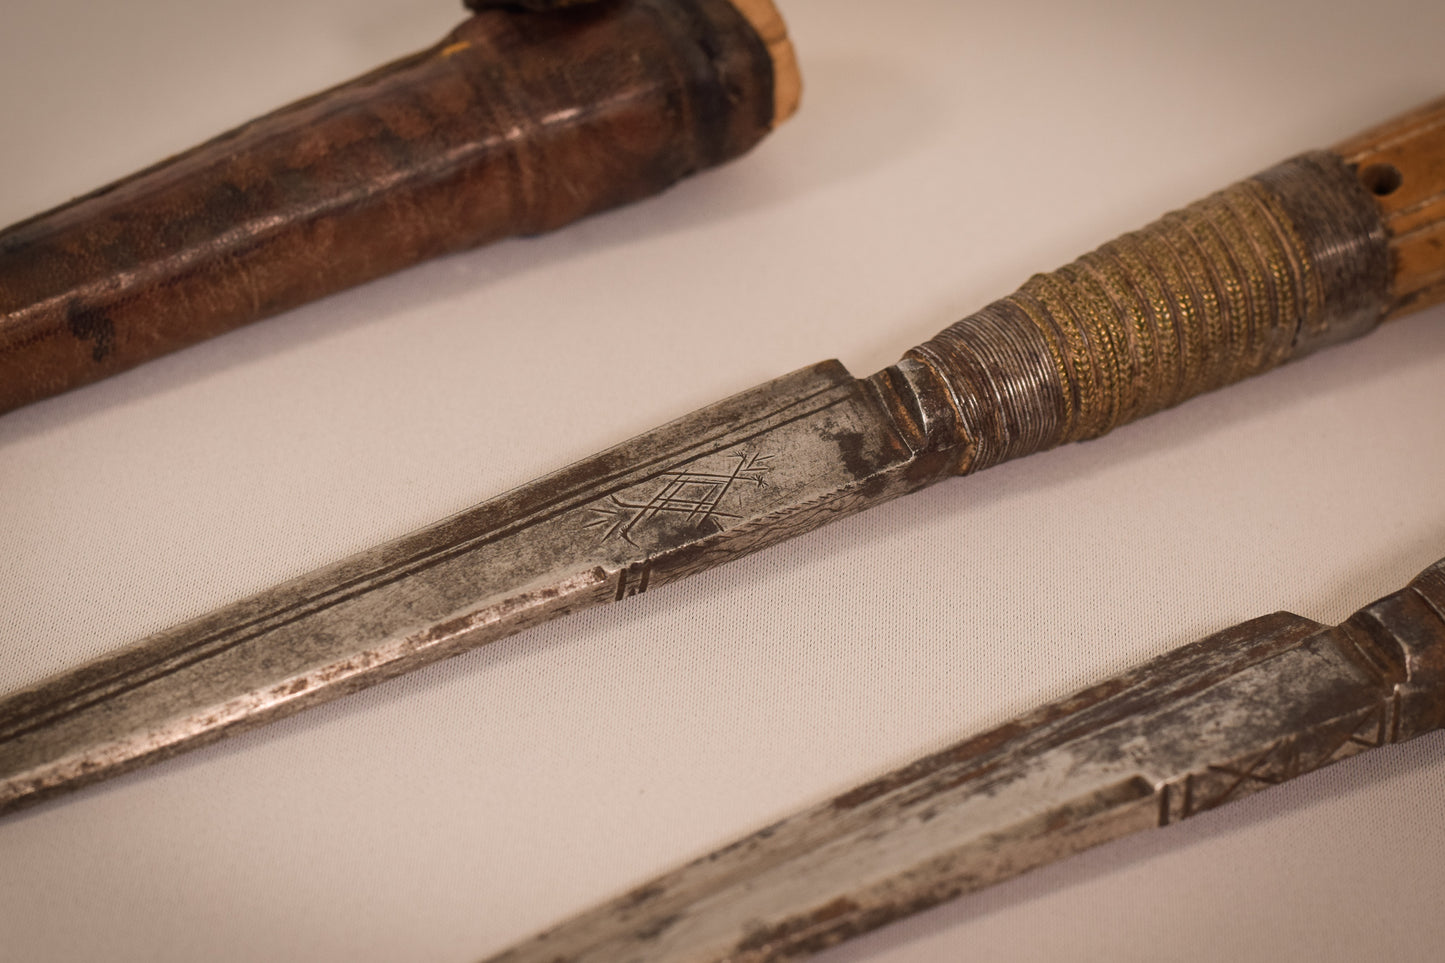 Two early 17th or 18th century hunting knifes or daggers one with leather sheaf